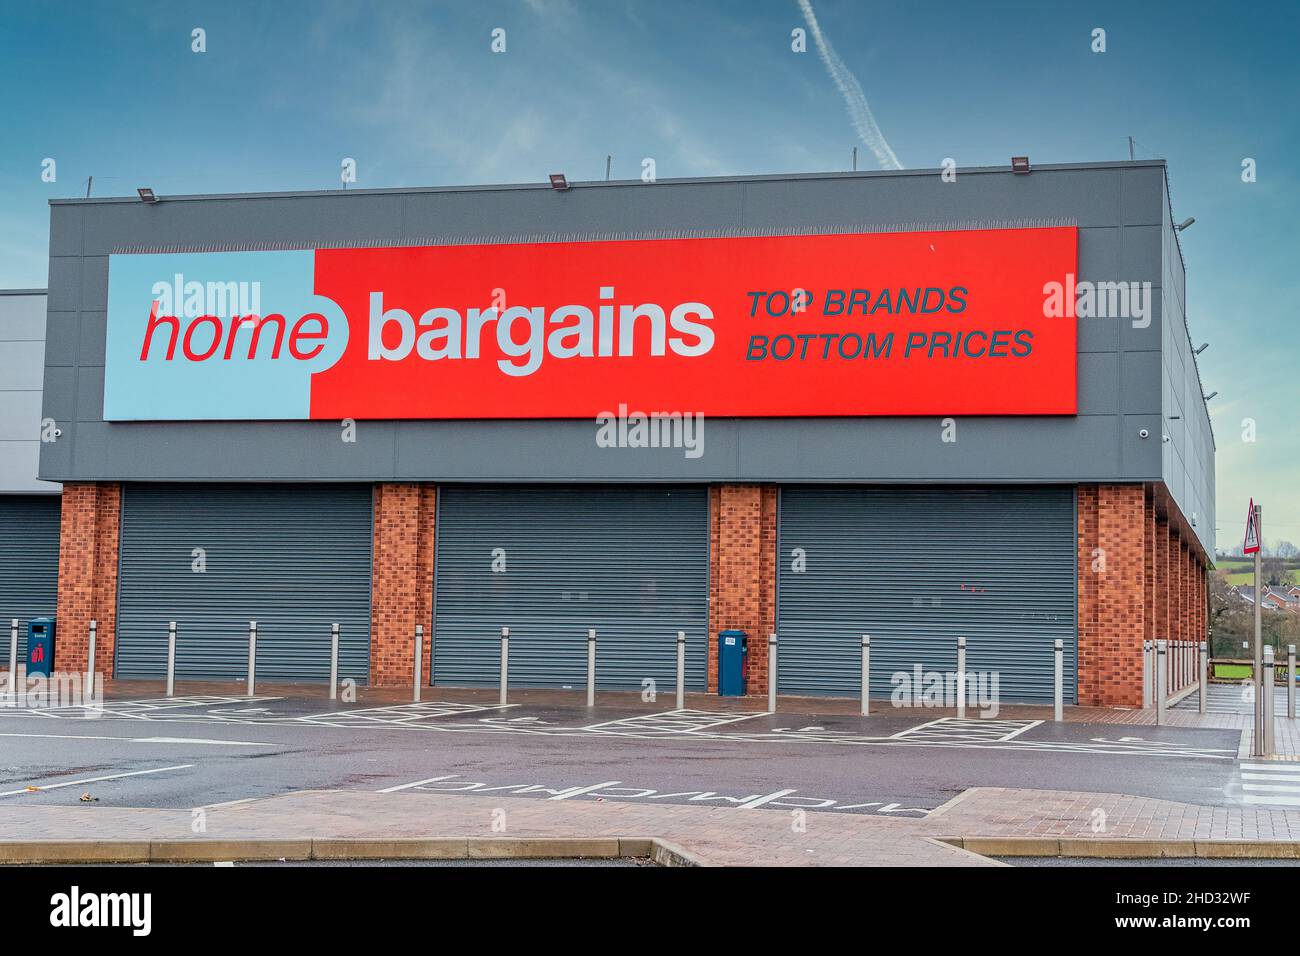 CHESTER, ENGLAND, UK - DECEMBER 25, 2021: View of a Home Bargains supermarket Stock Photo